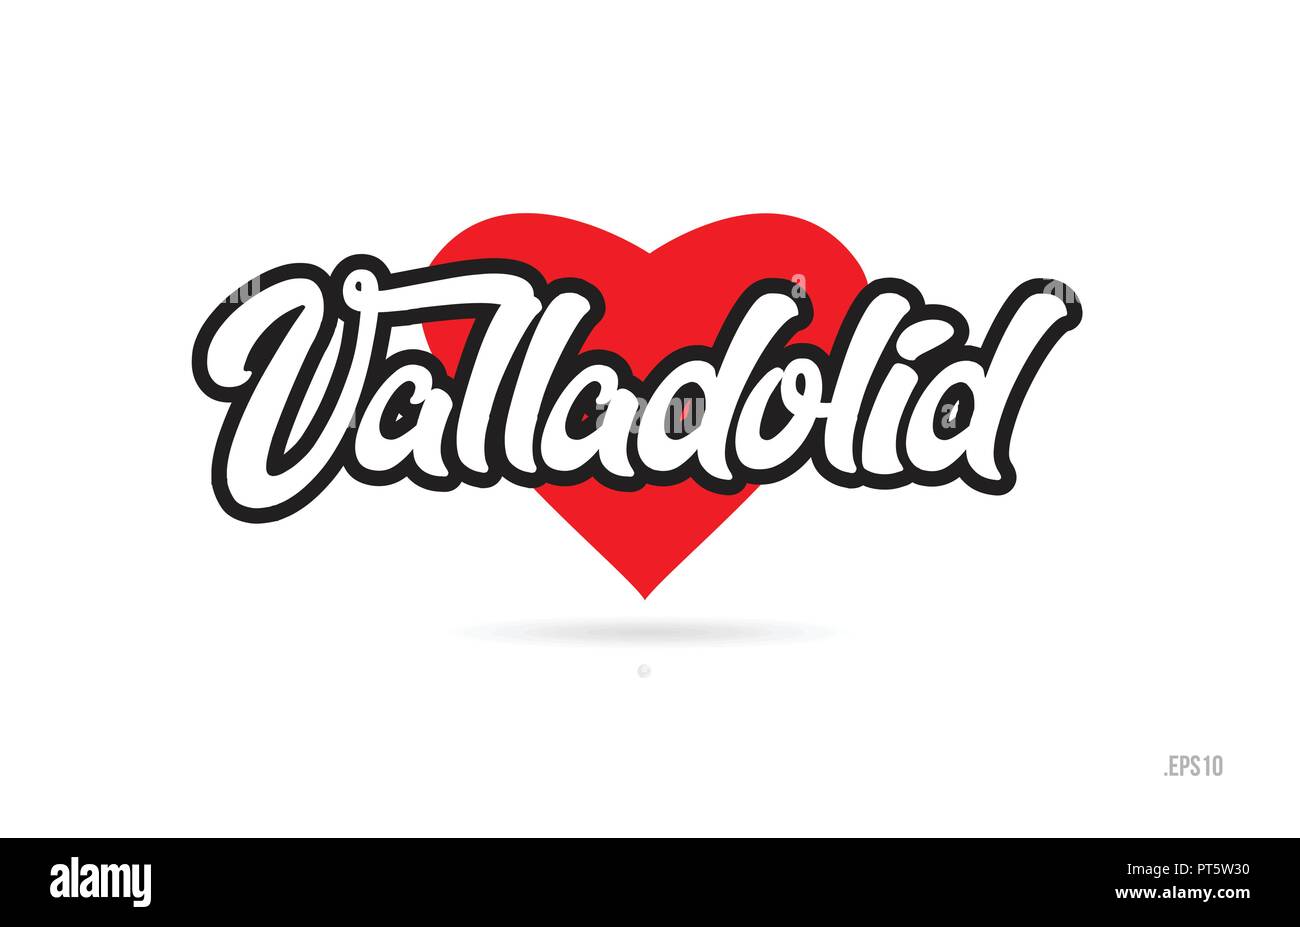 valladolid city text design with red heart typographic icon design suitable for touristic promotion Stock Vector